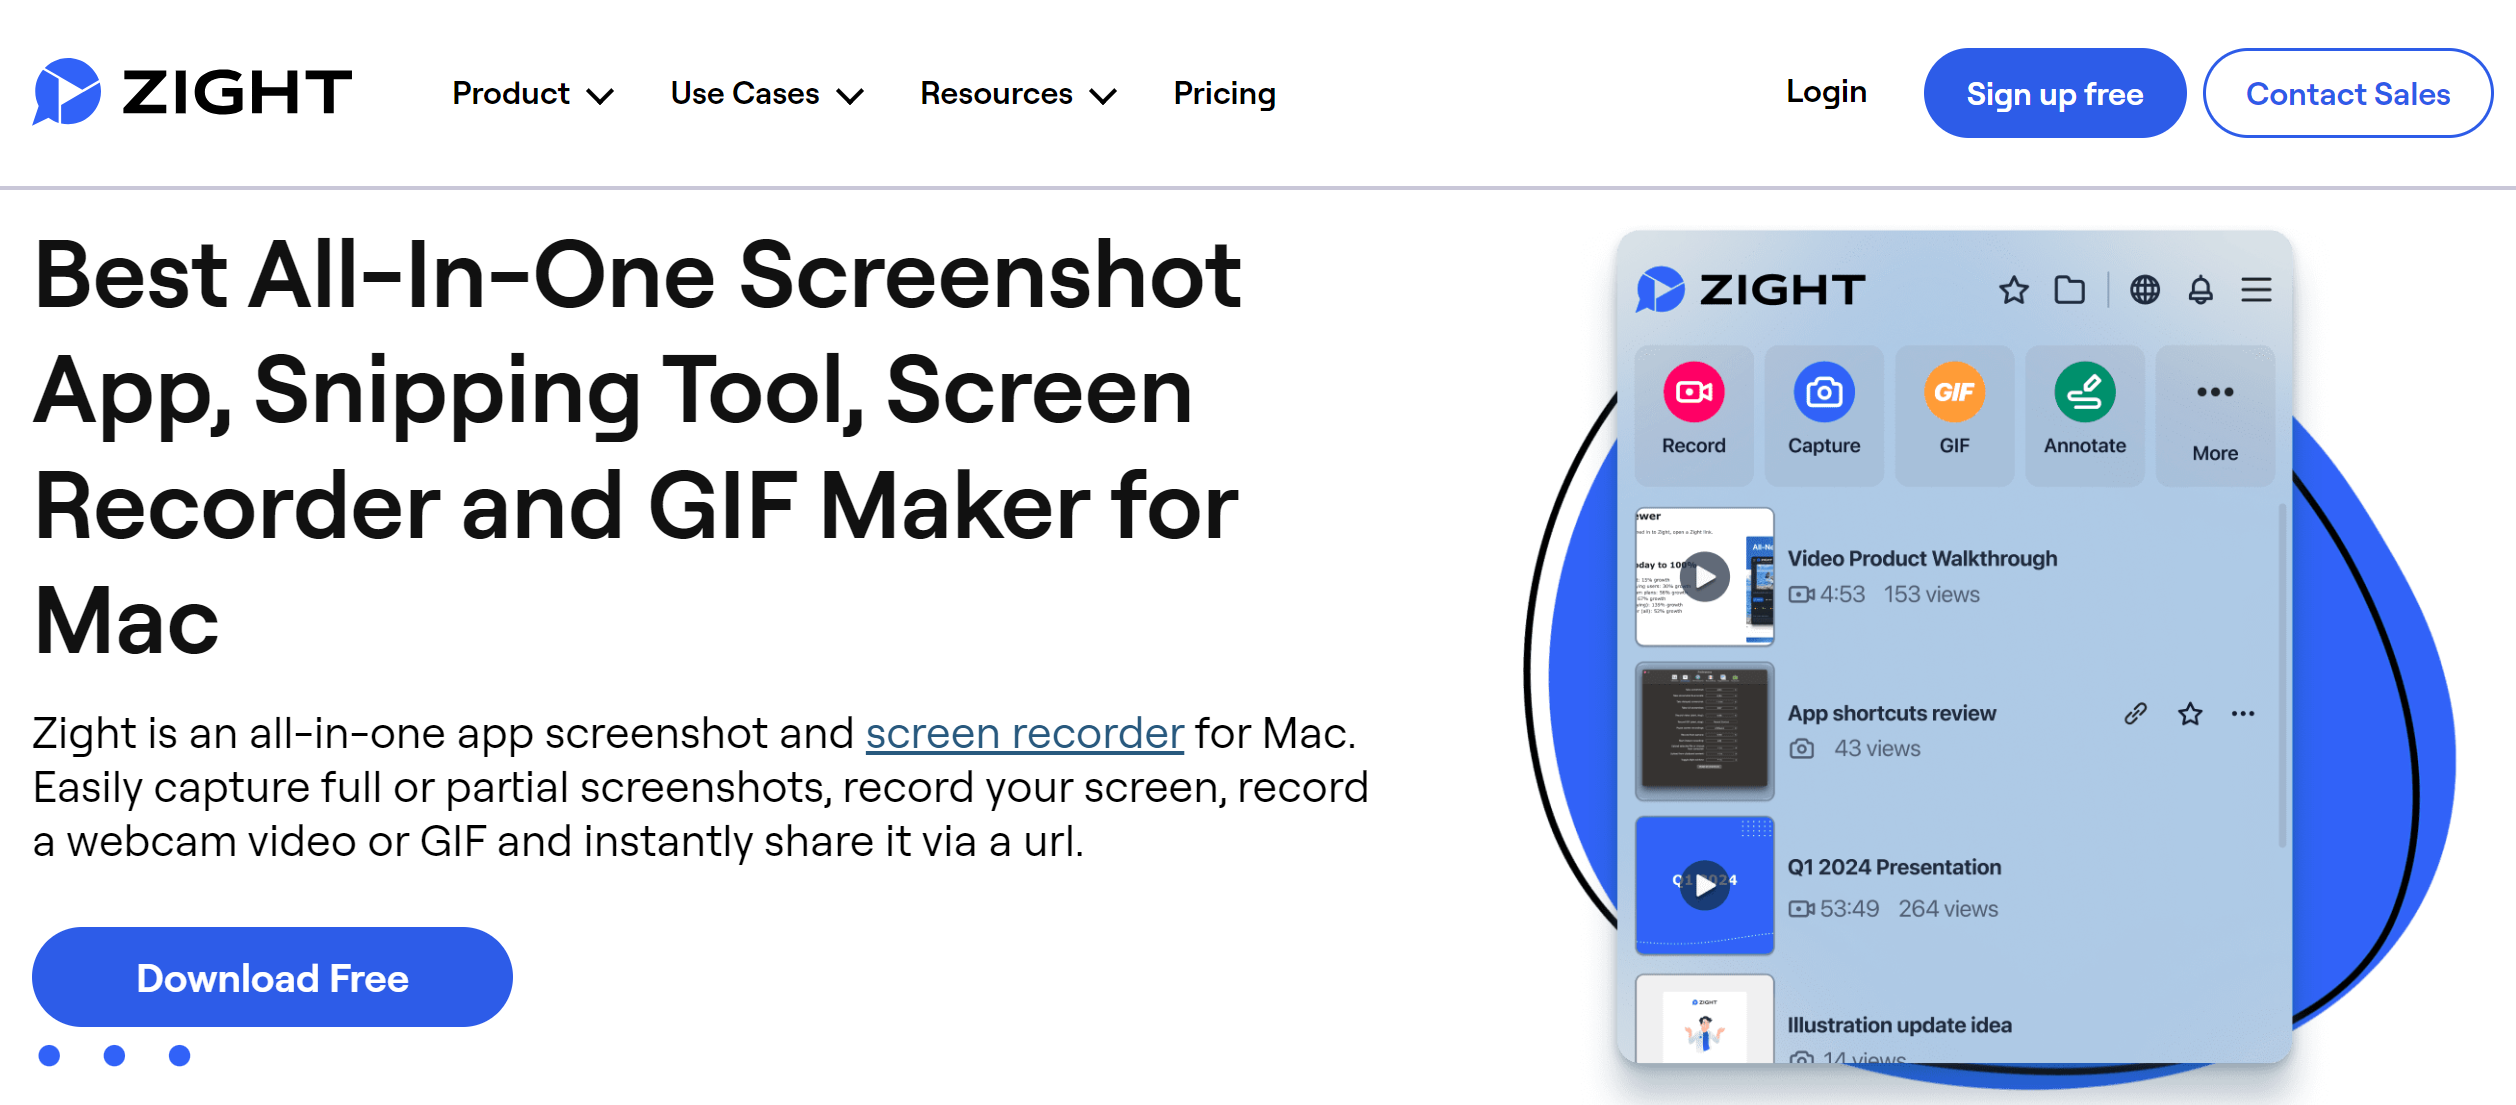 Why Choose Zight Screen Recorder for Mac?